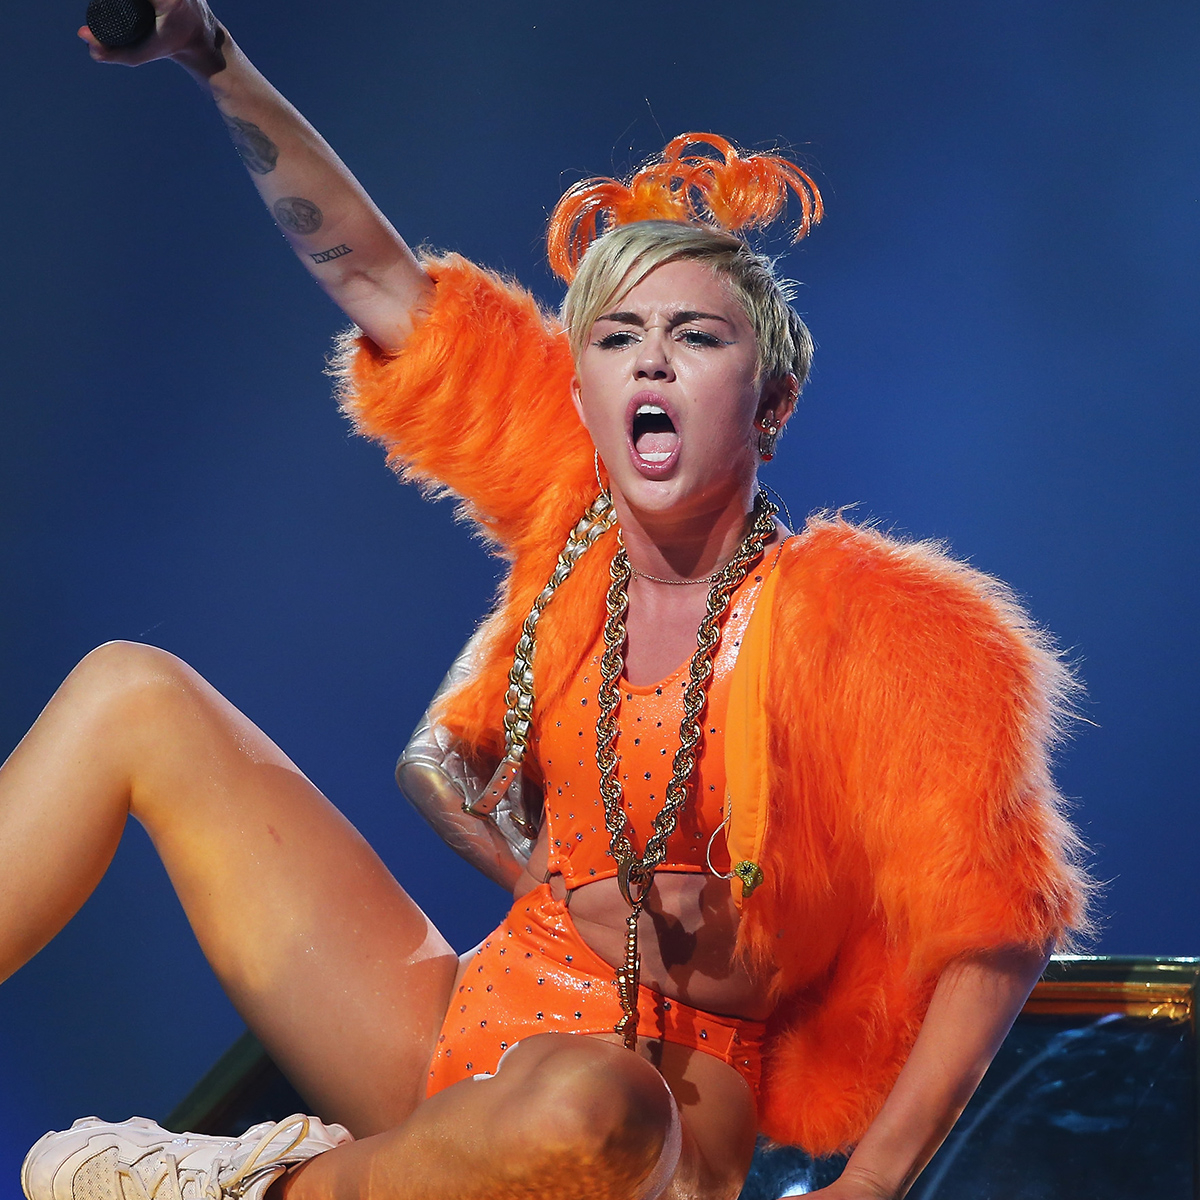 Why Miley Cyrus Says She Didn’t Make Any Money From Her Bangerz Tour